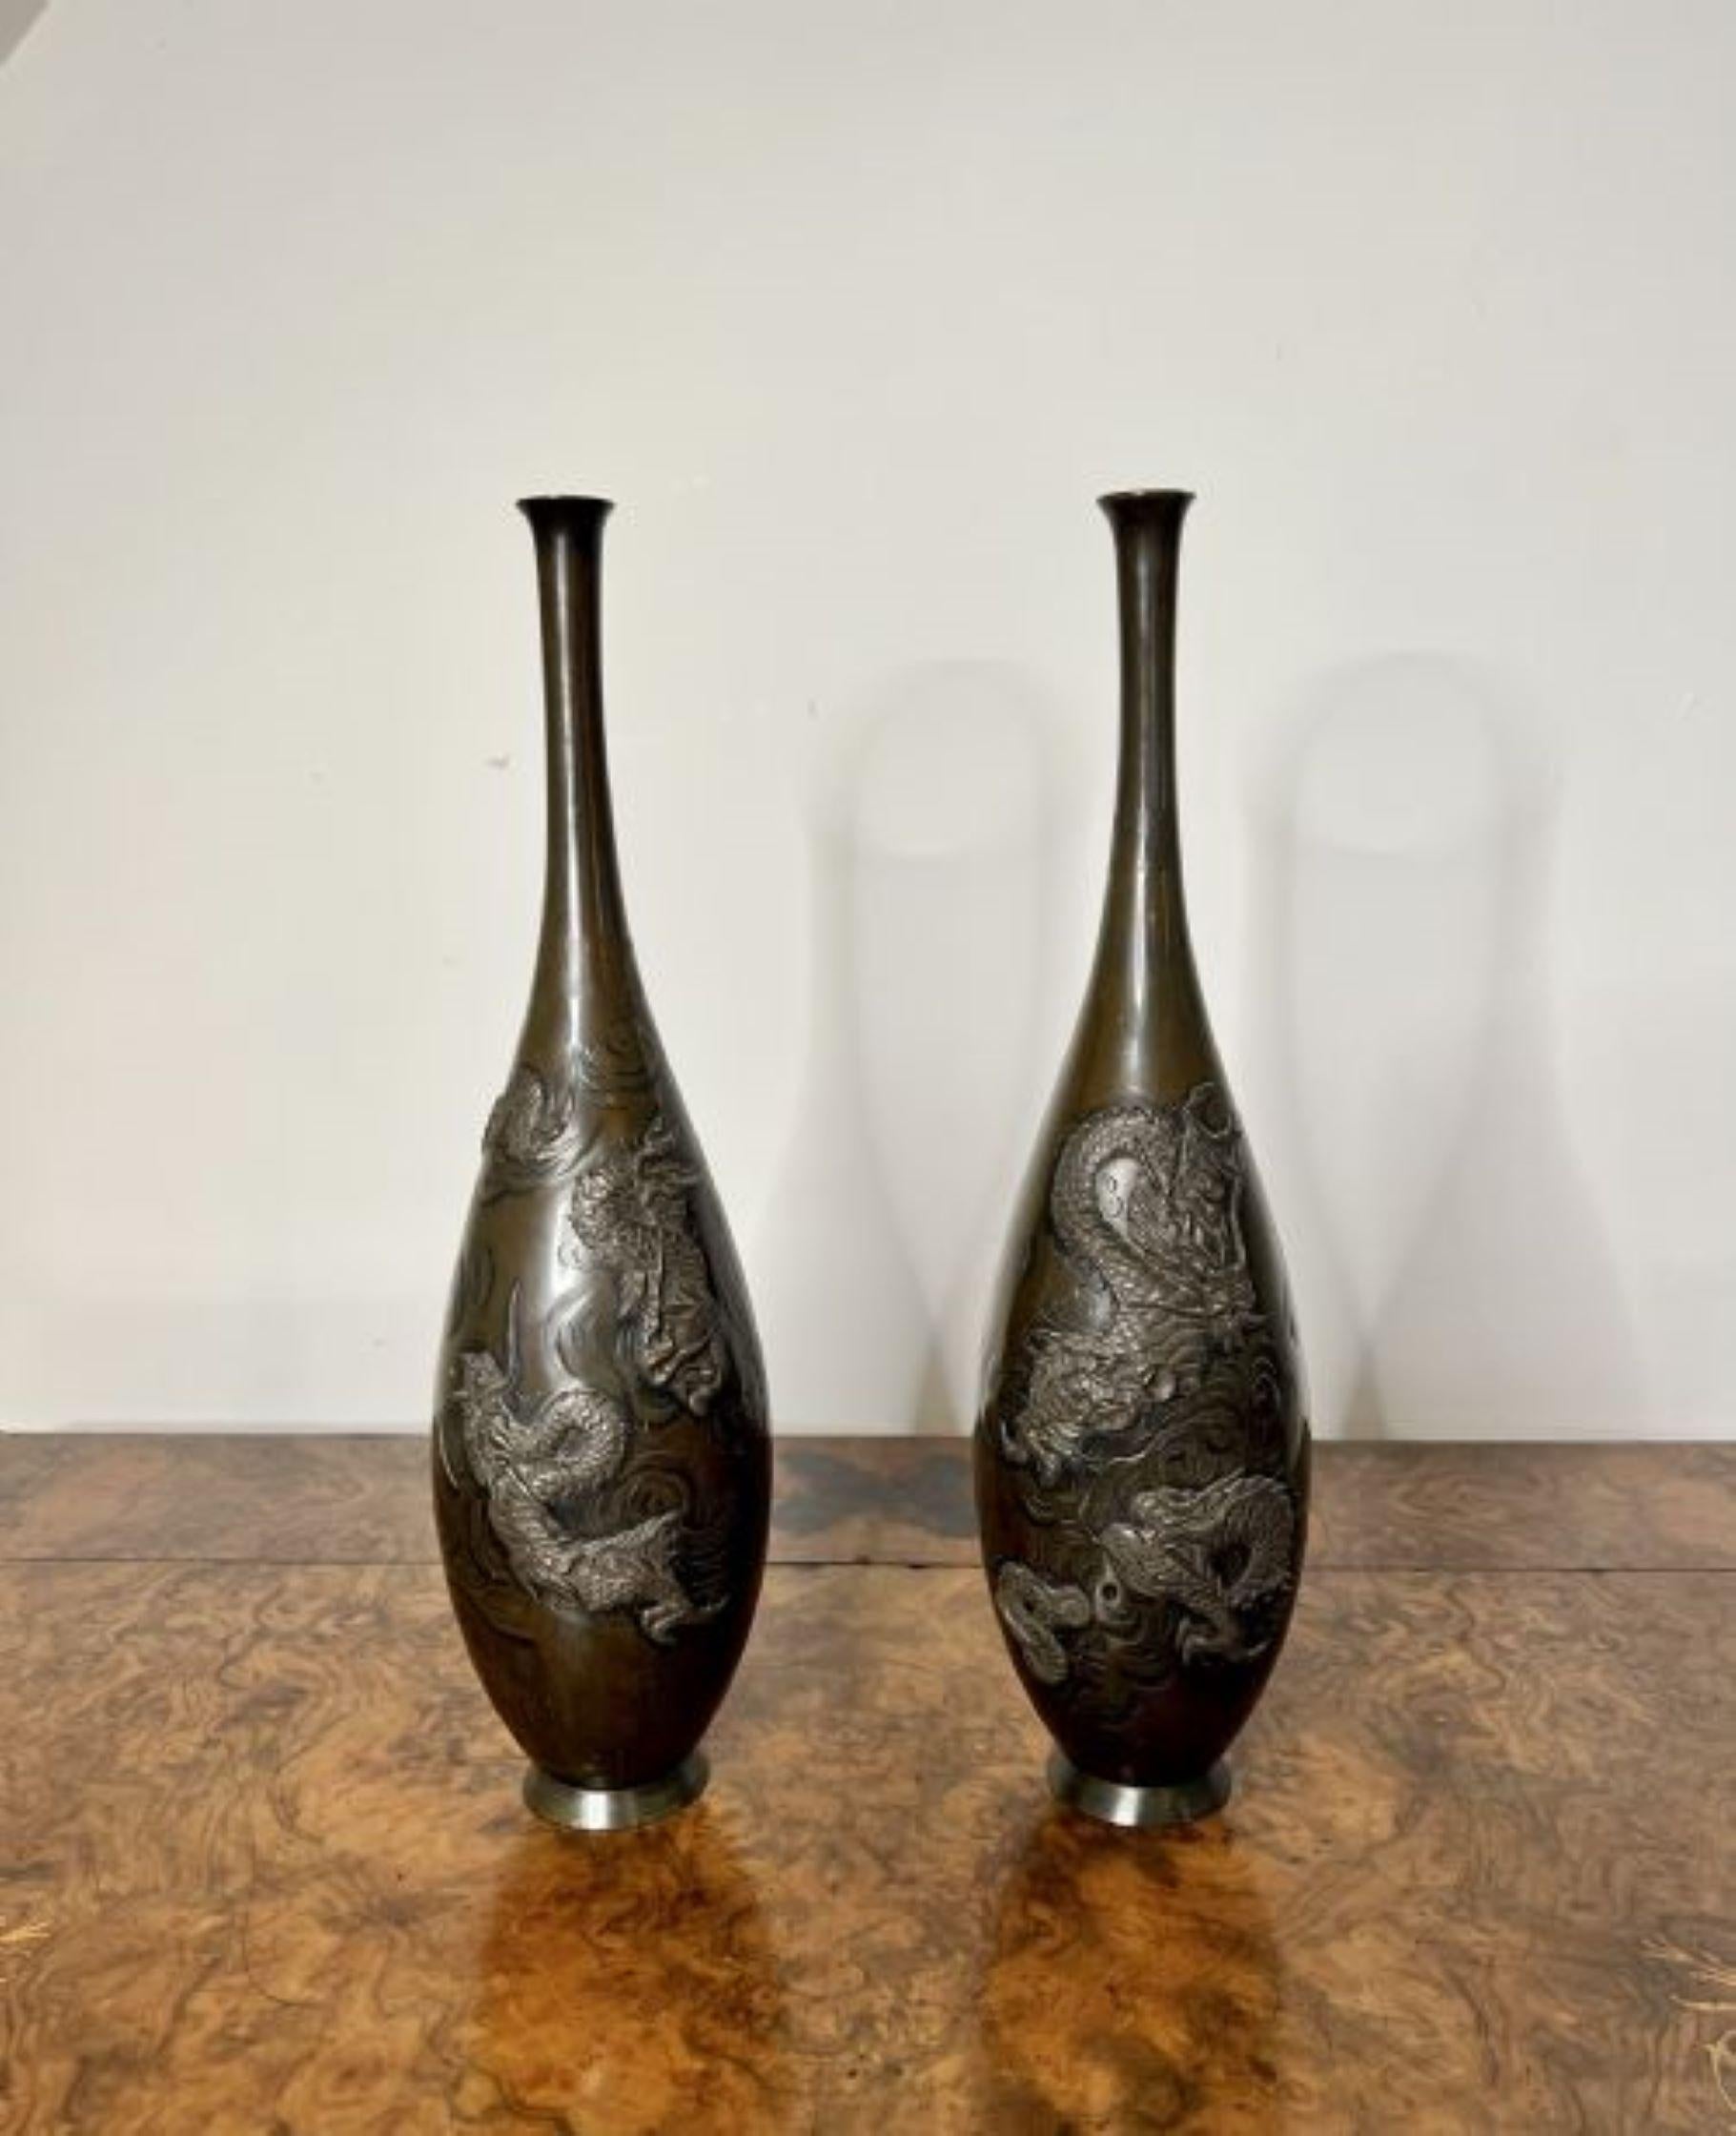 Fantastic pair of antique Japanese bronze vases, having a wonderful shaped body, Meiji period bronze Japanese vases decorated in relief with dragons.
